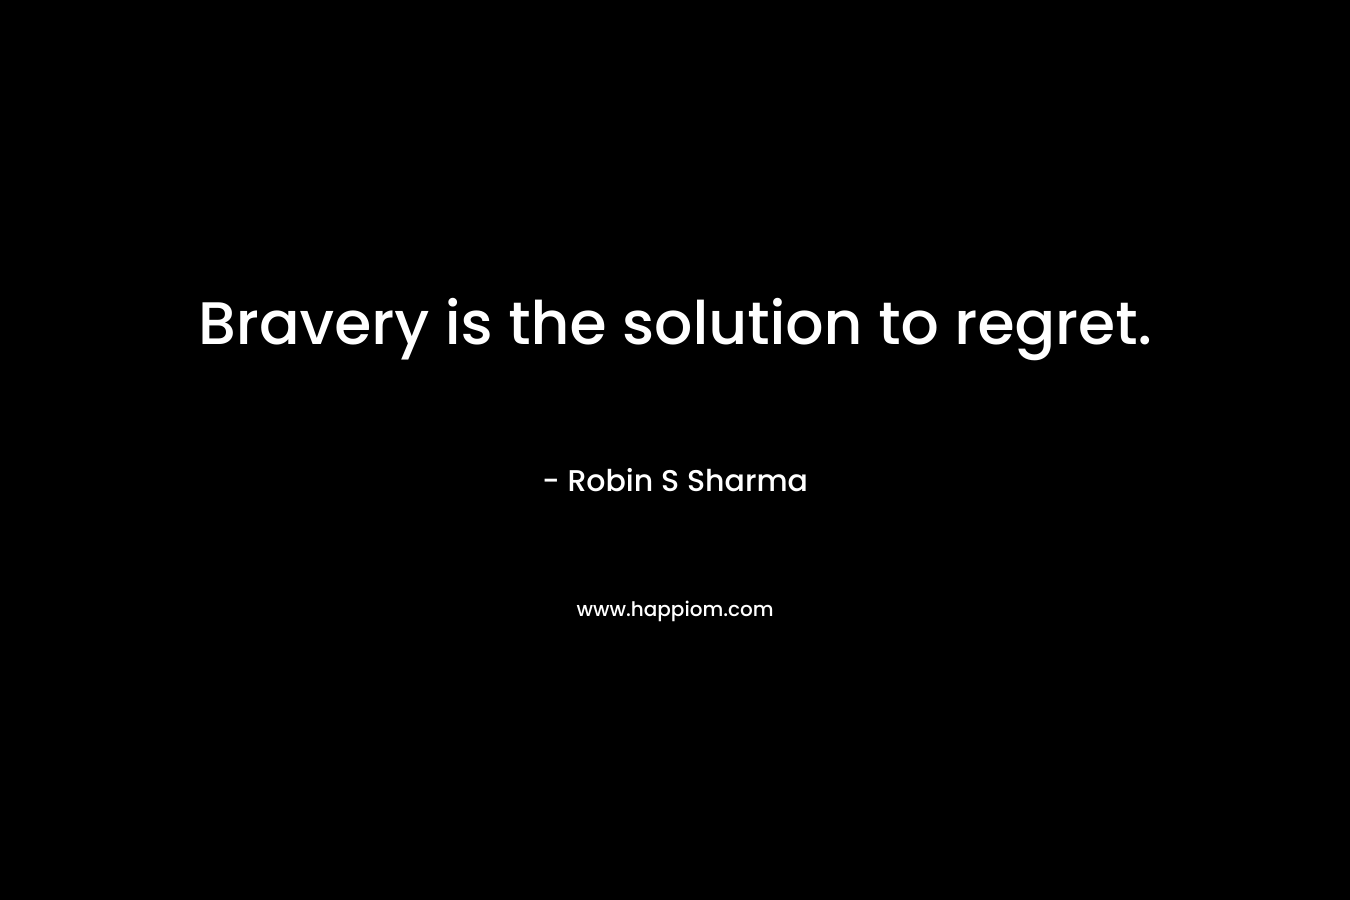 Bravery is the solution to regret. – Robin S Sharma